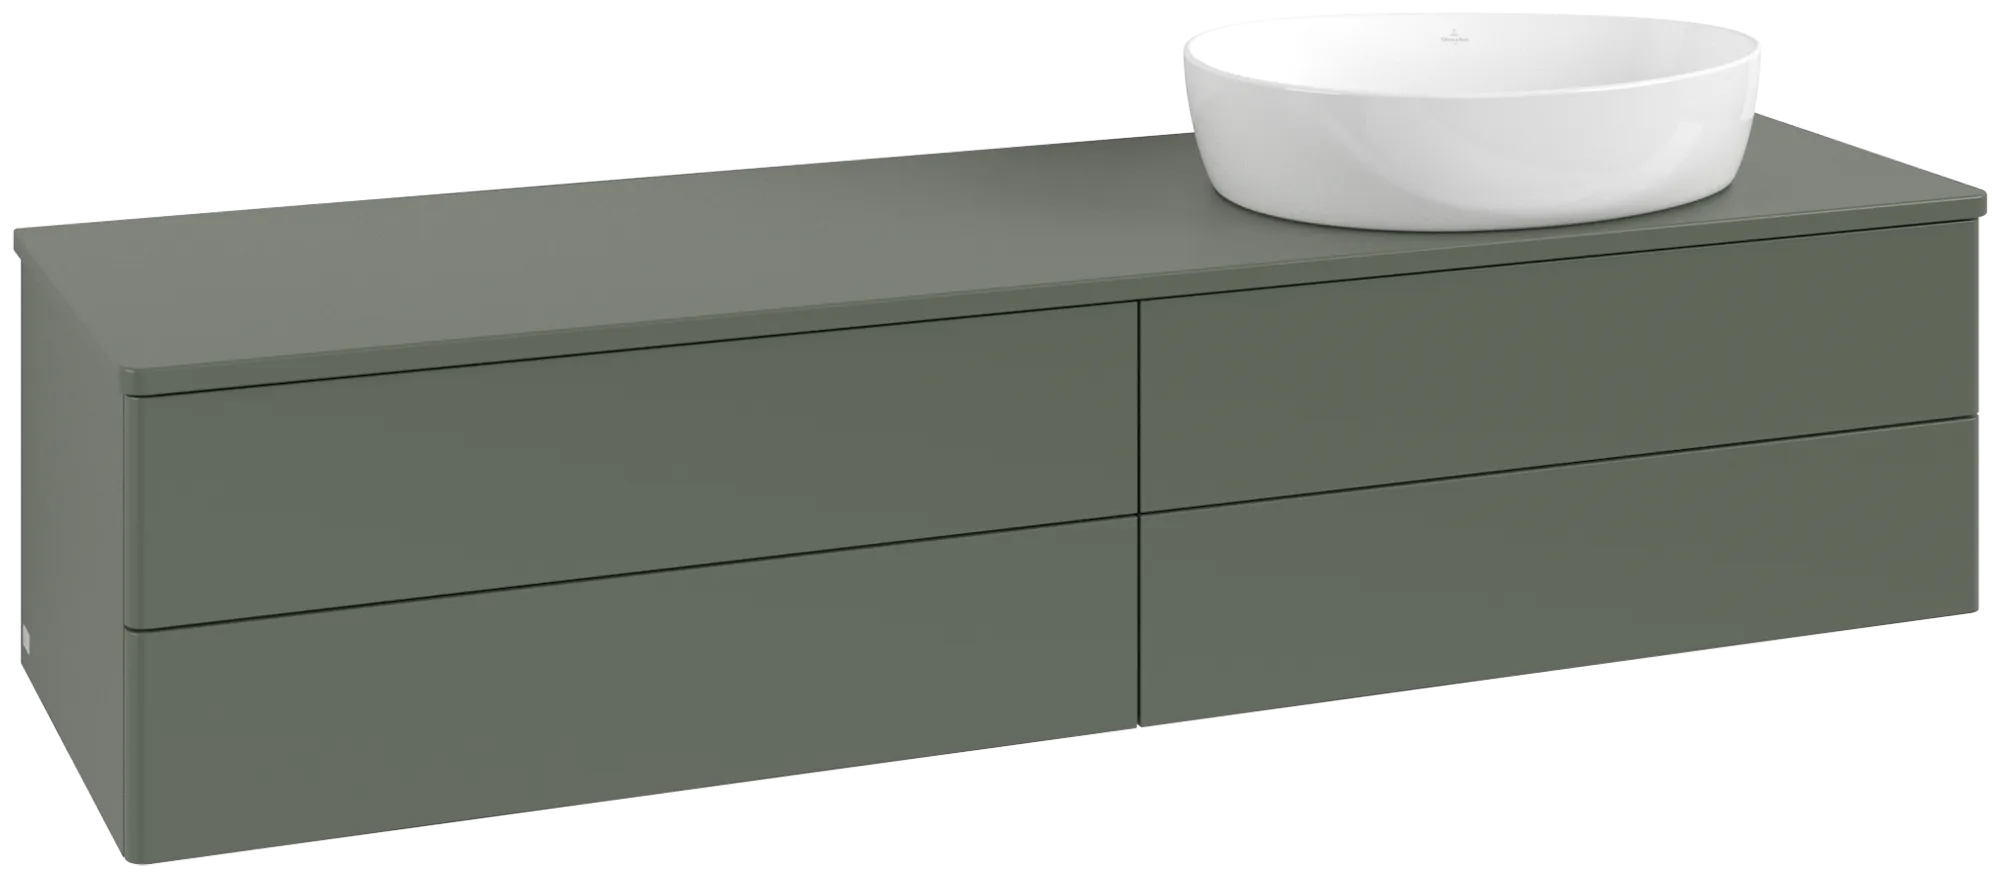 Picture of VILLEROY BOCH Antao Vanity unit, with lighting, 4 pull-out compartments, 1600 x 360 x 500 mm, Front without structure, Leaf Green Matt Lacquer / Leaf Green Matt Lacquer #L27050HL